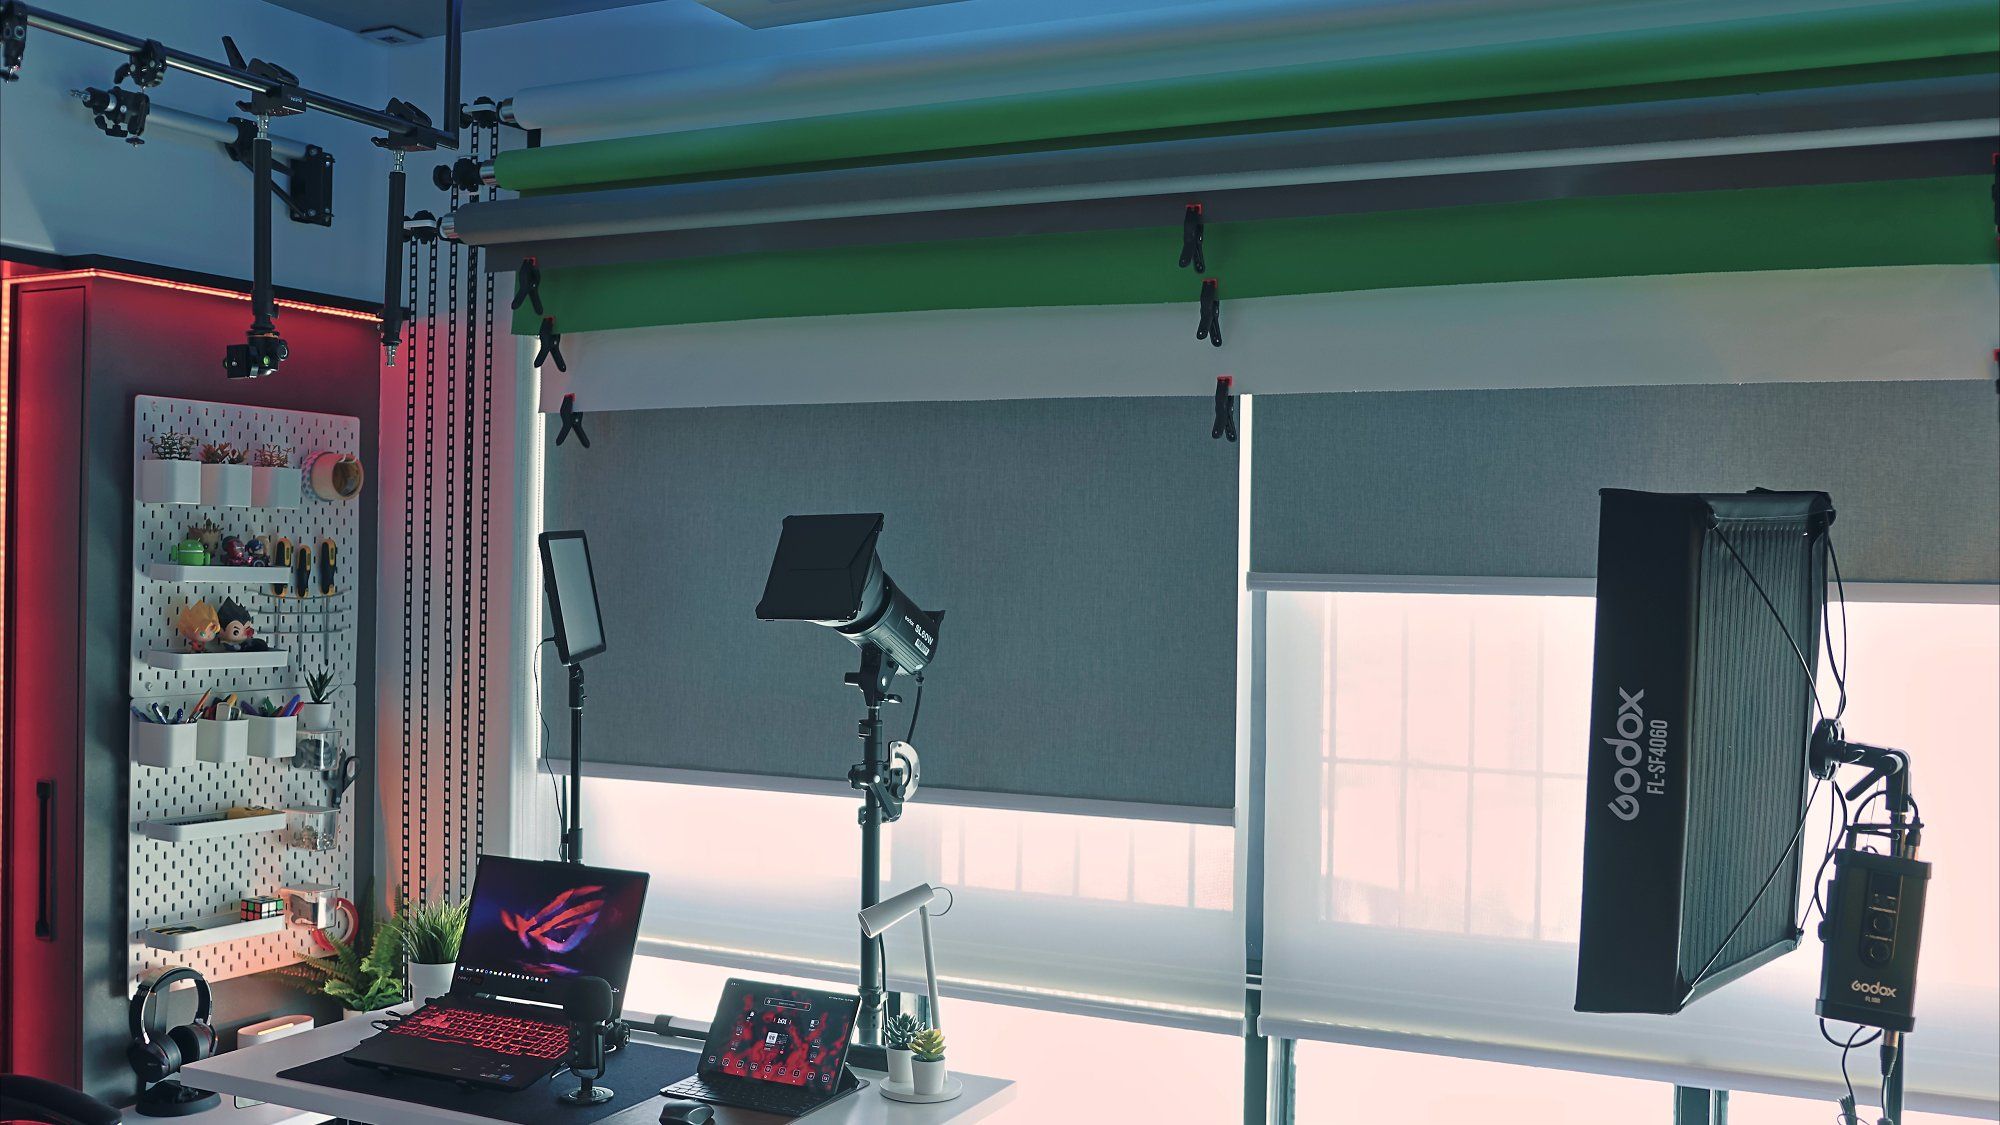 A corner of Ron Tek’s home office setup, featuring three seamless paper roll backdrops positioned above the window, along with some gear and devices for video shooting